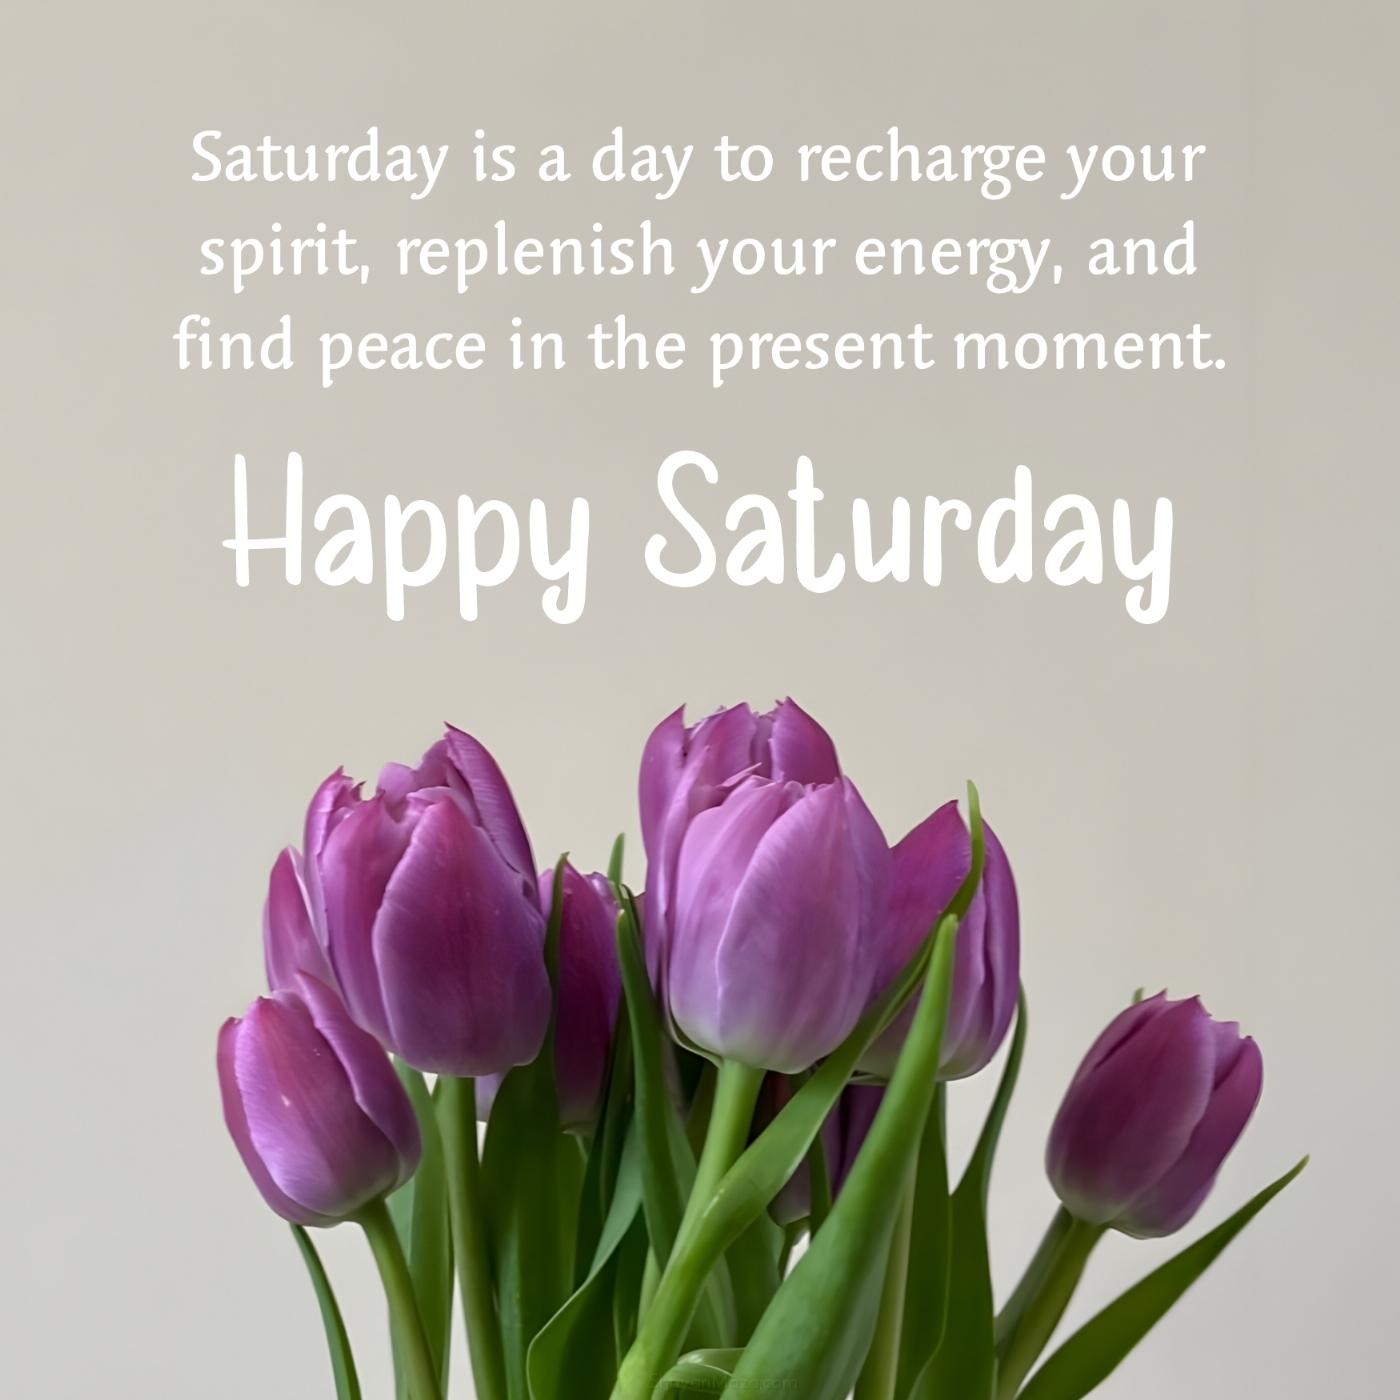 Saturday is a day to recharge your spirit replenish your energy